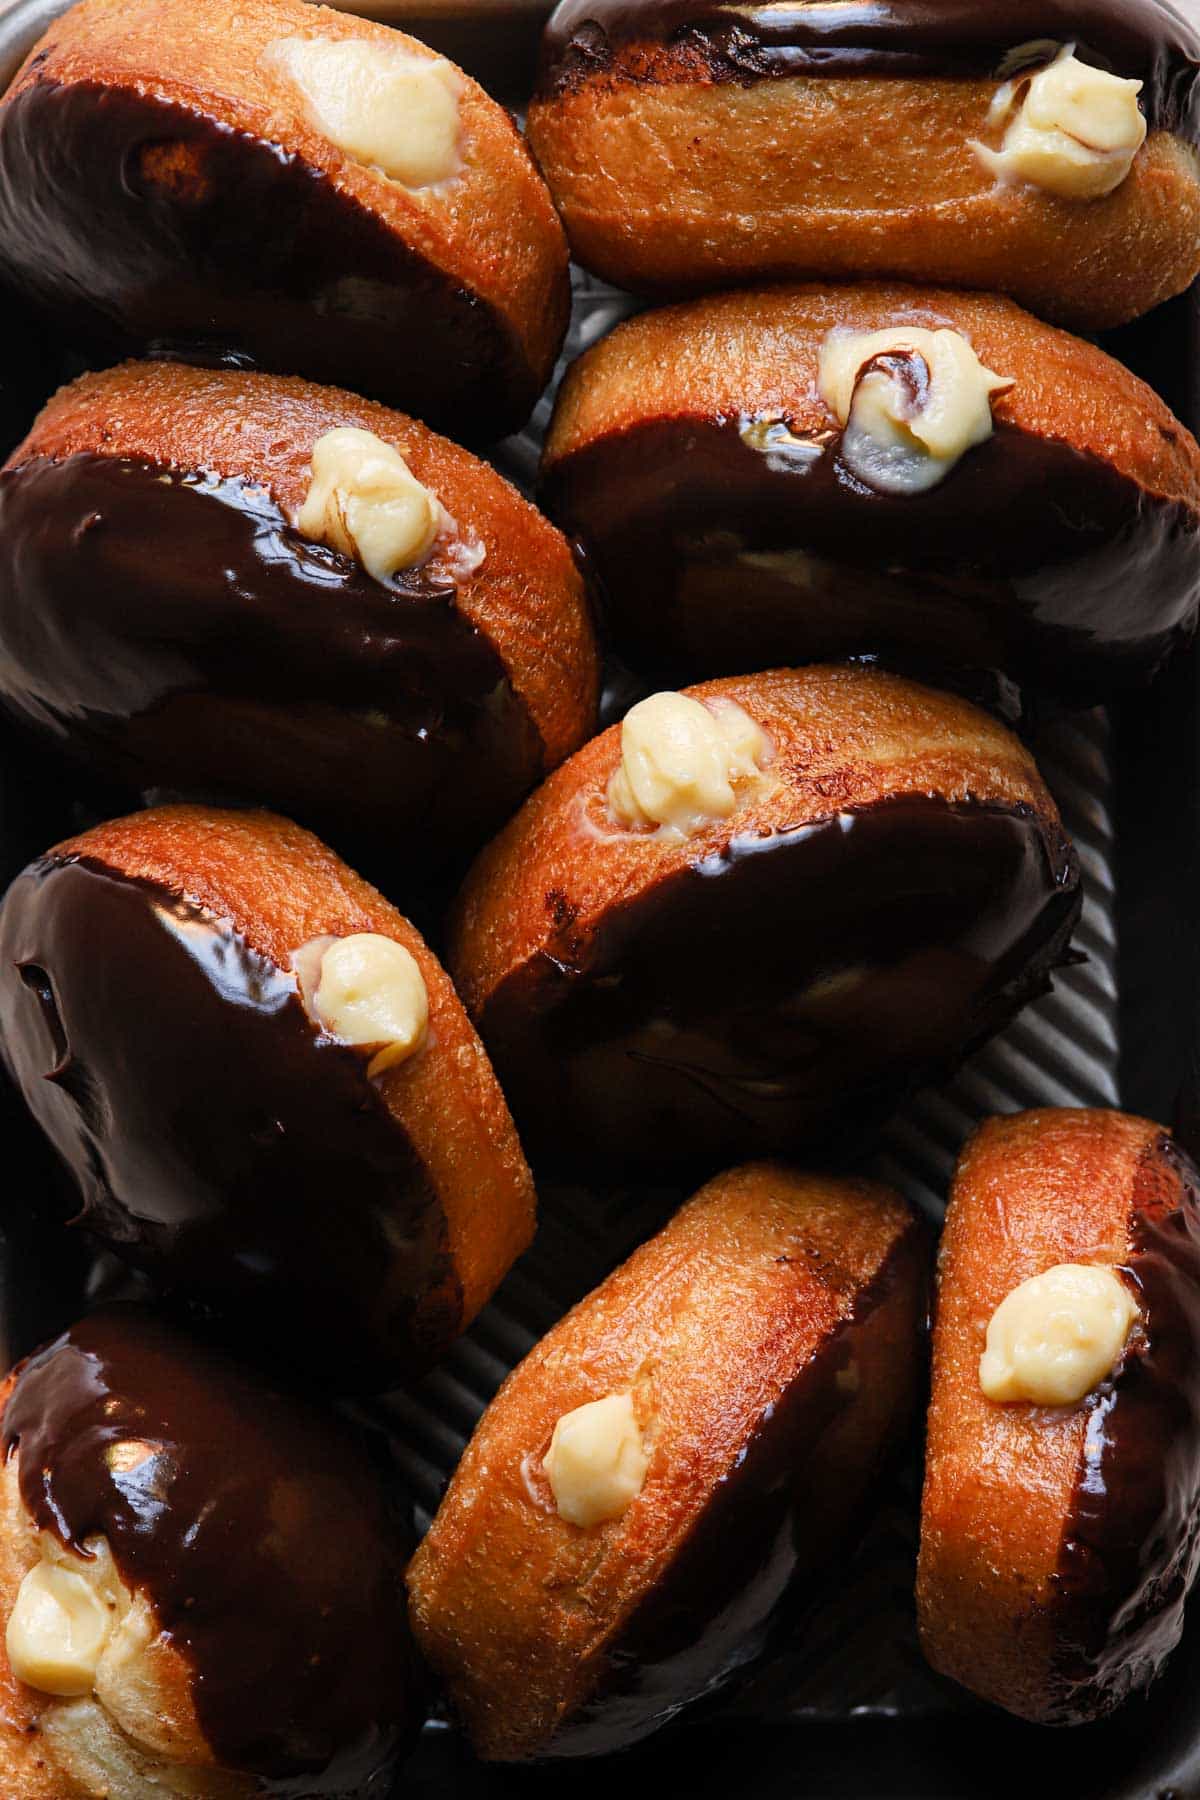 Cream filled donuts